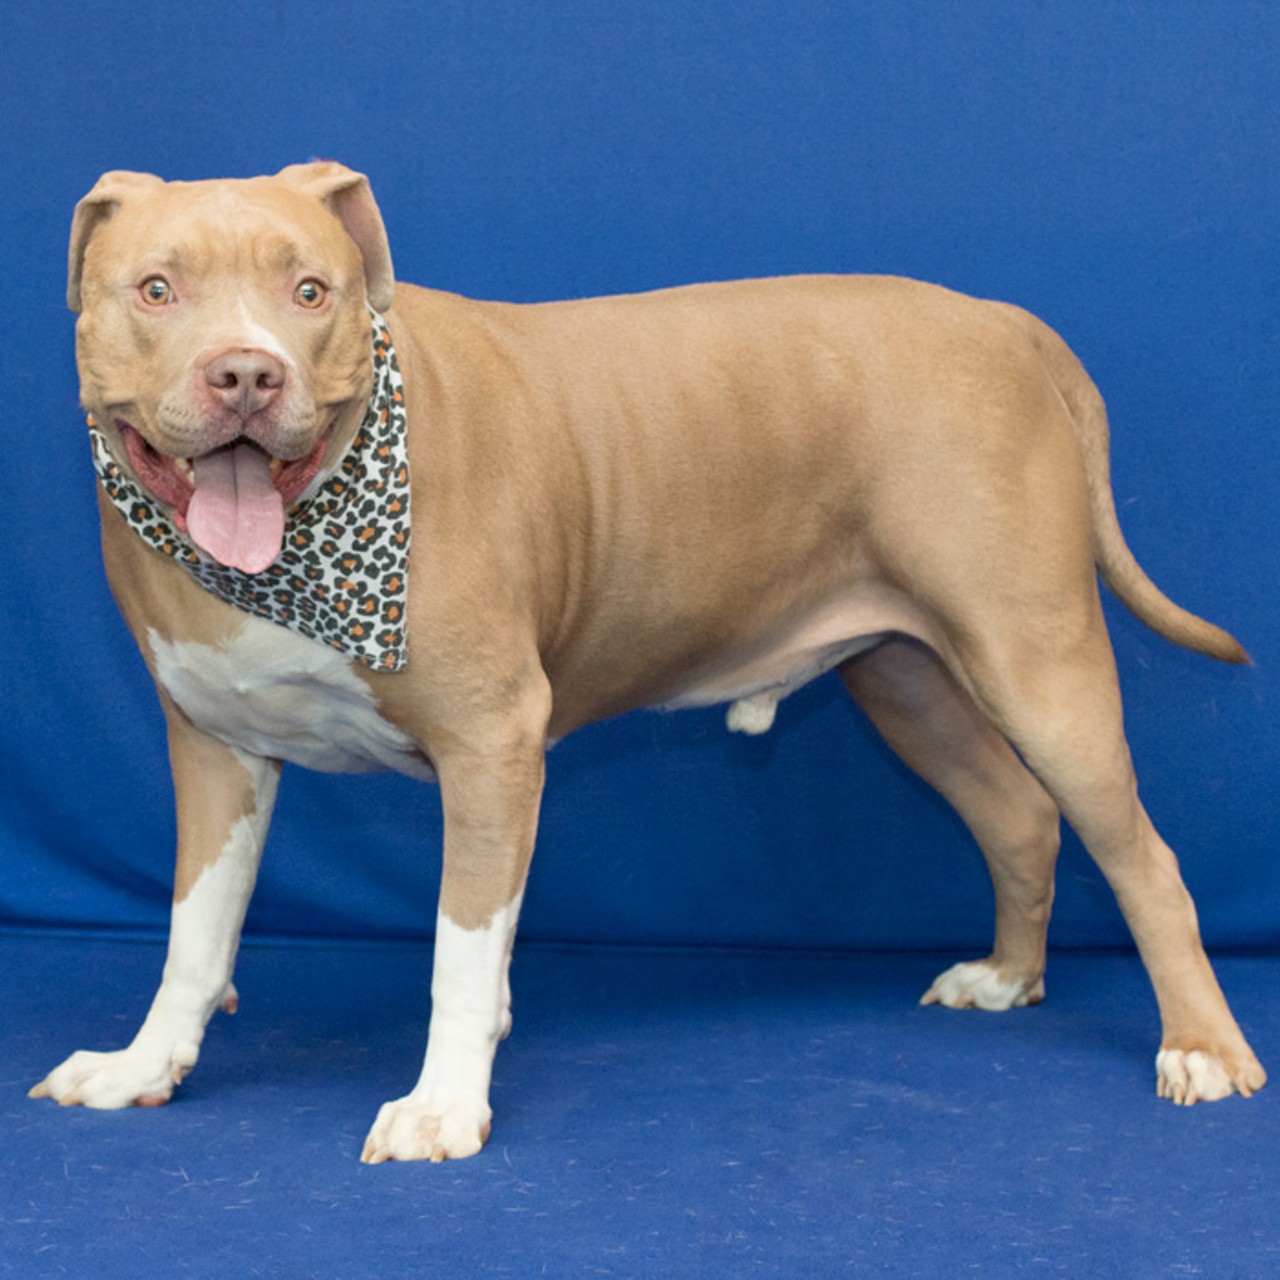 NAME: Gage
GENDER: Male
BREED: Pit Bull Terrier
AGE: 5 years
WEIGHT: 87 pounds
SPECIAL CONSIDERATIONS: None
REASON I CAME TO MHS: Owner surrender
LOCATION: Berman Center for Animal Care in Westland
ID NUMBER: 865068